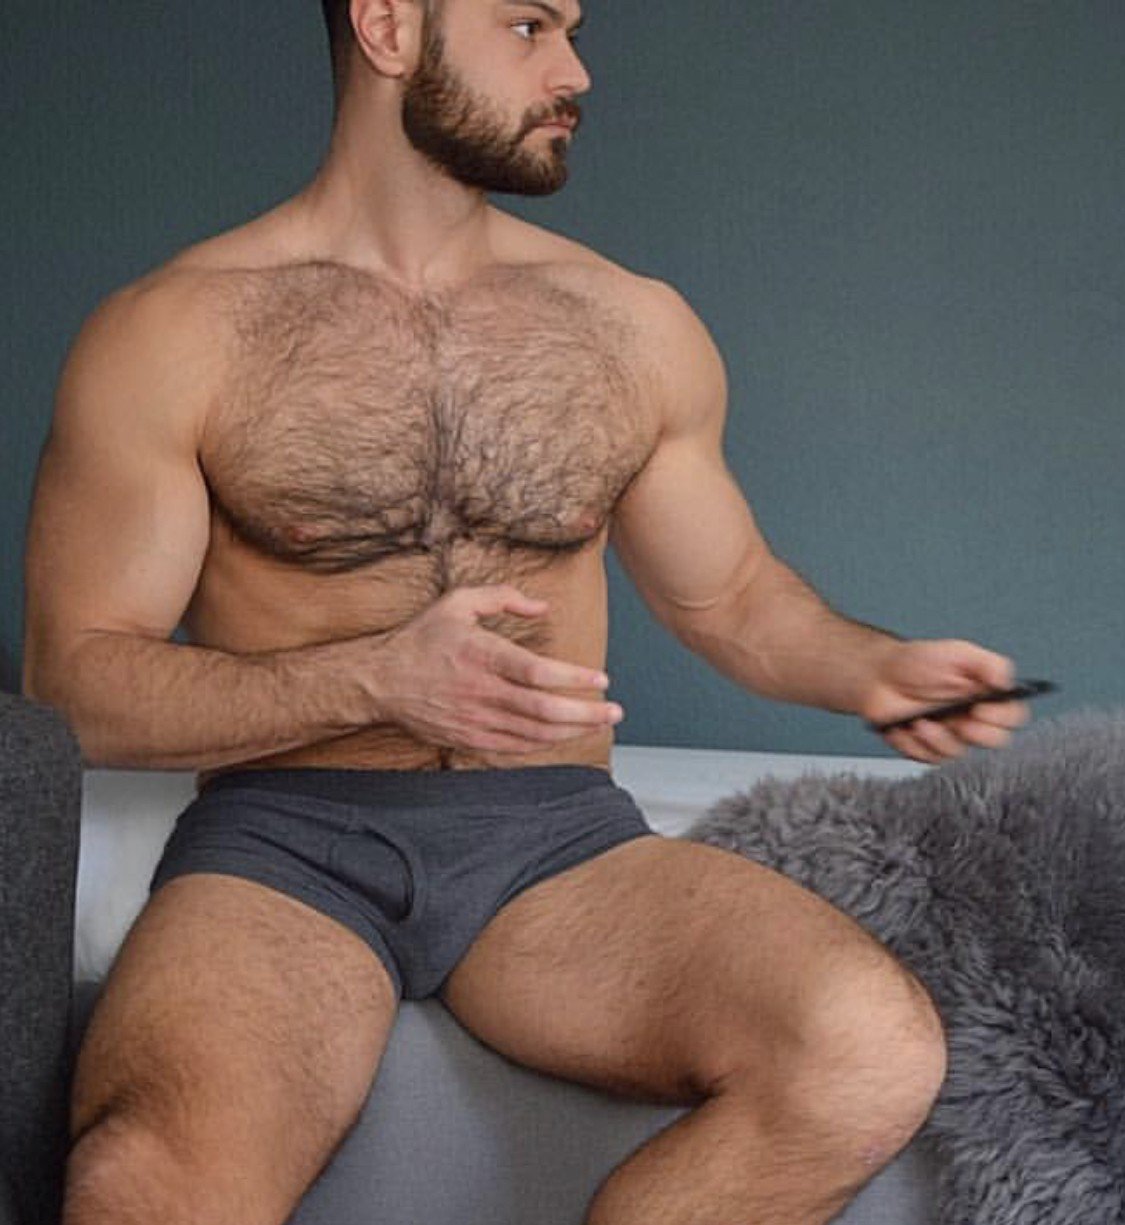 Post by WantSomeDaddies with the username @WantSomeDaddies,  April 18, 2019 at 5:39 AM. The post is about the topic Gay and the text says 'What a beautiful man!'